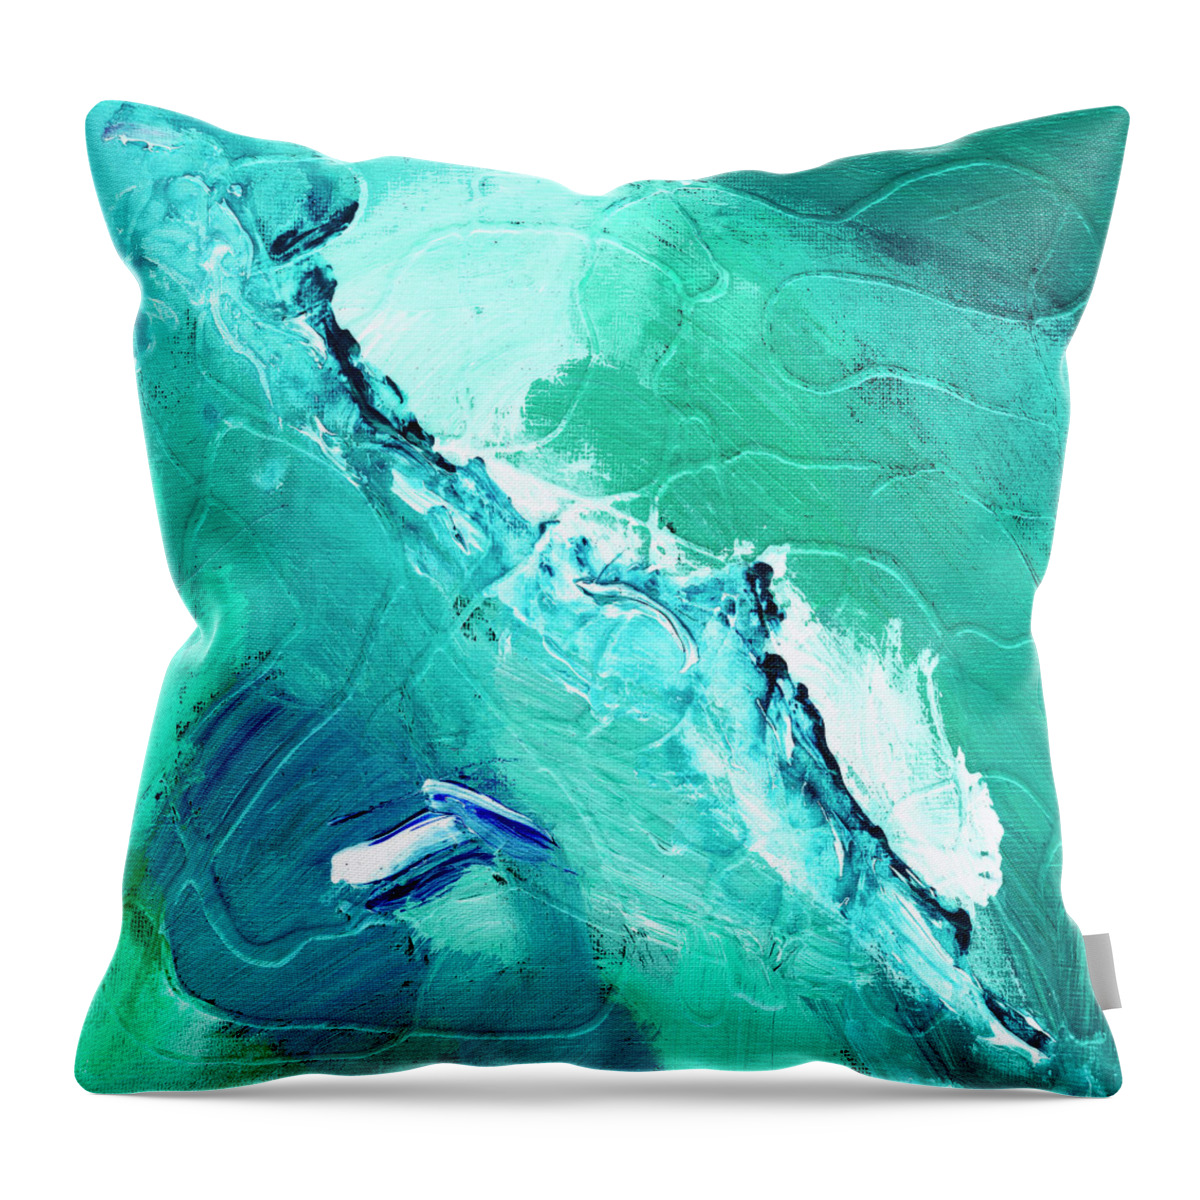 Abstract Throw Pillow featuring the painting Barrier Reef by Dominic Piperata